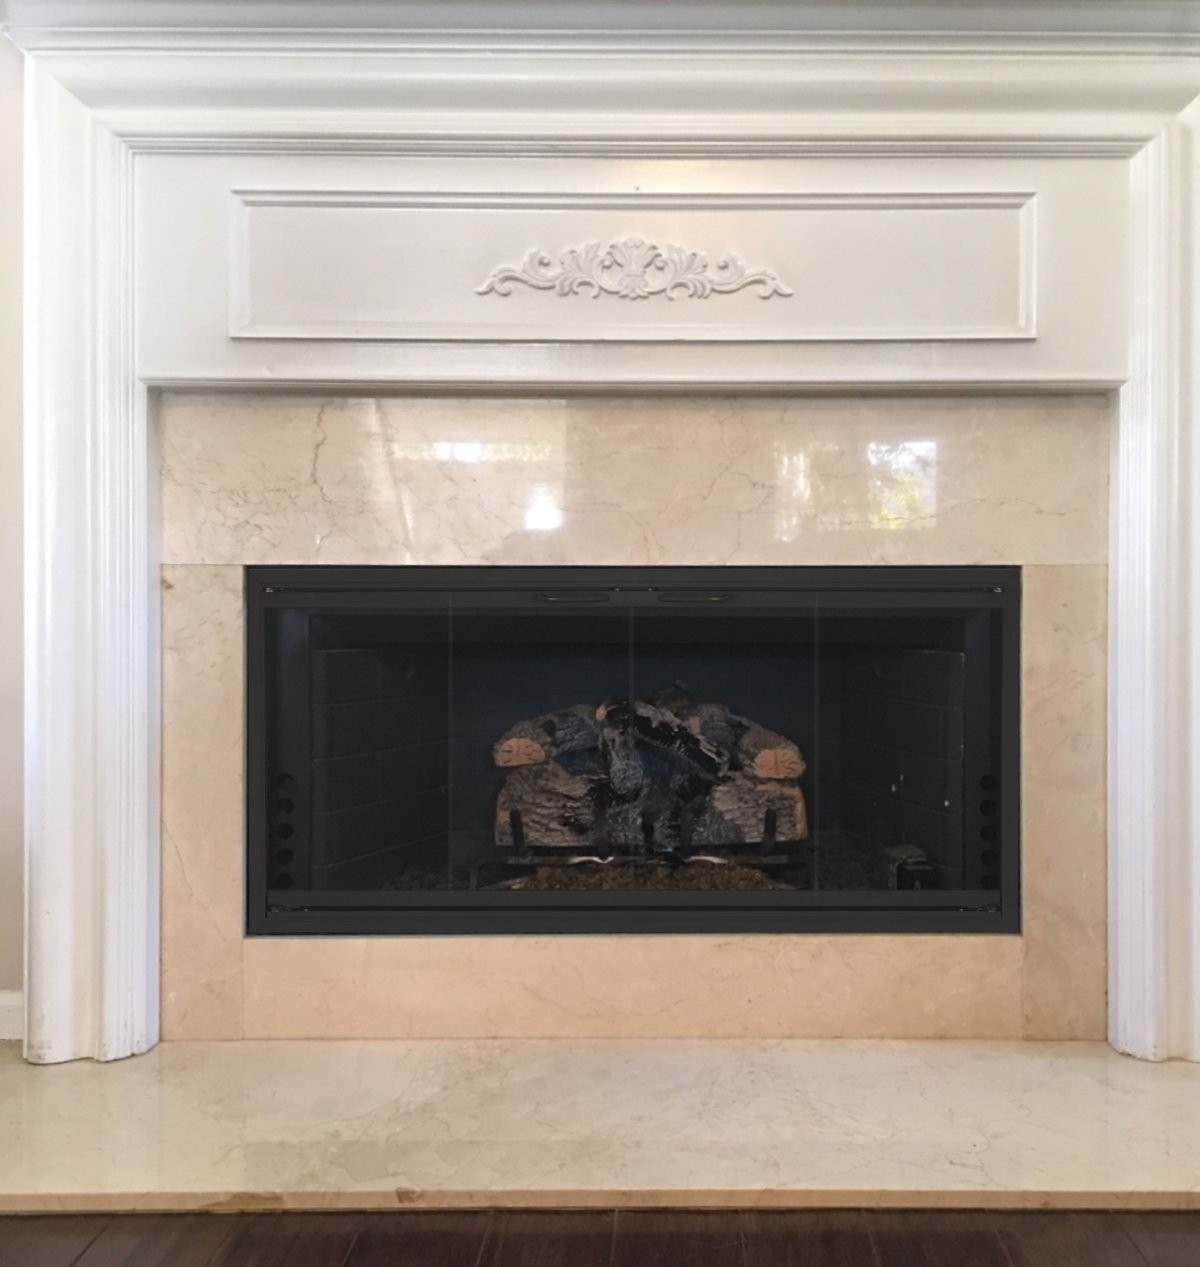 Extra Small Fireplace Screens Luxury Stiletto Custom Fireplace Doors for Masonry Fireplaces From